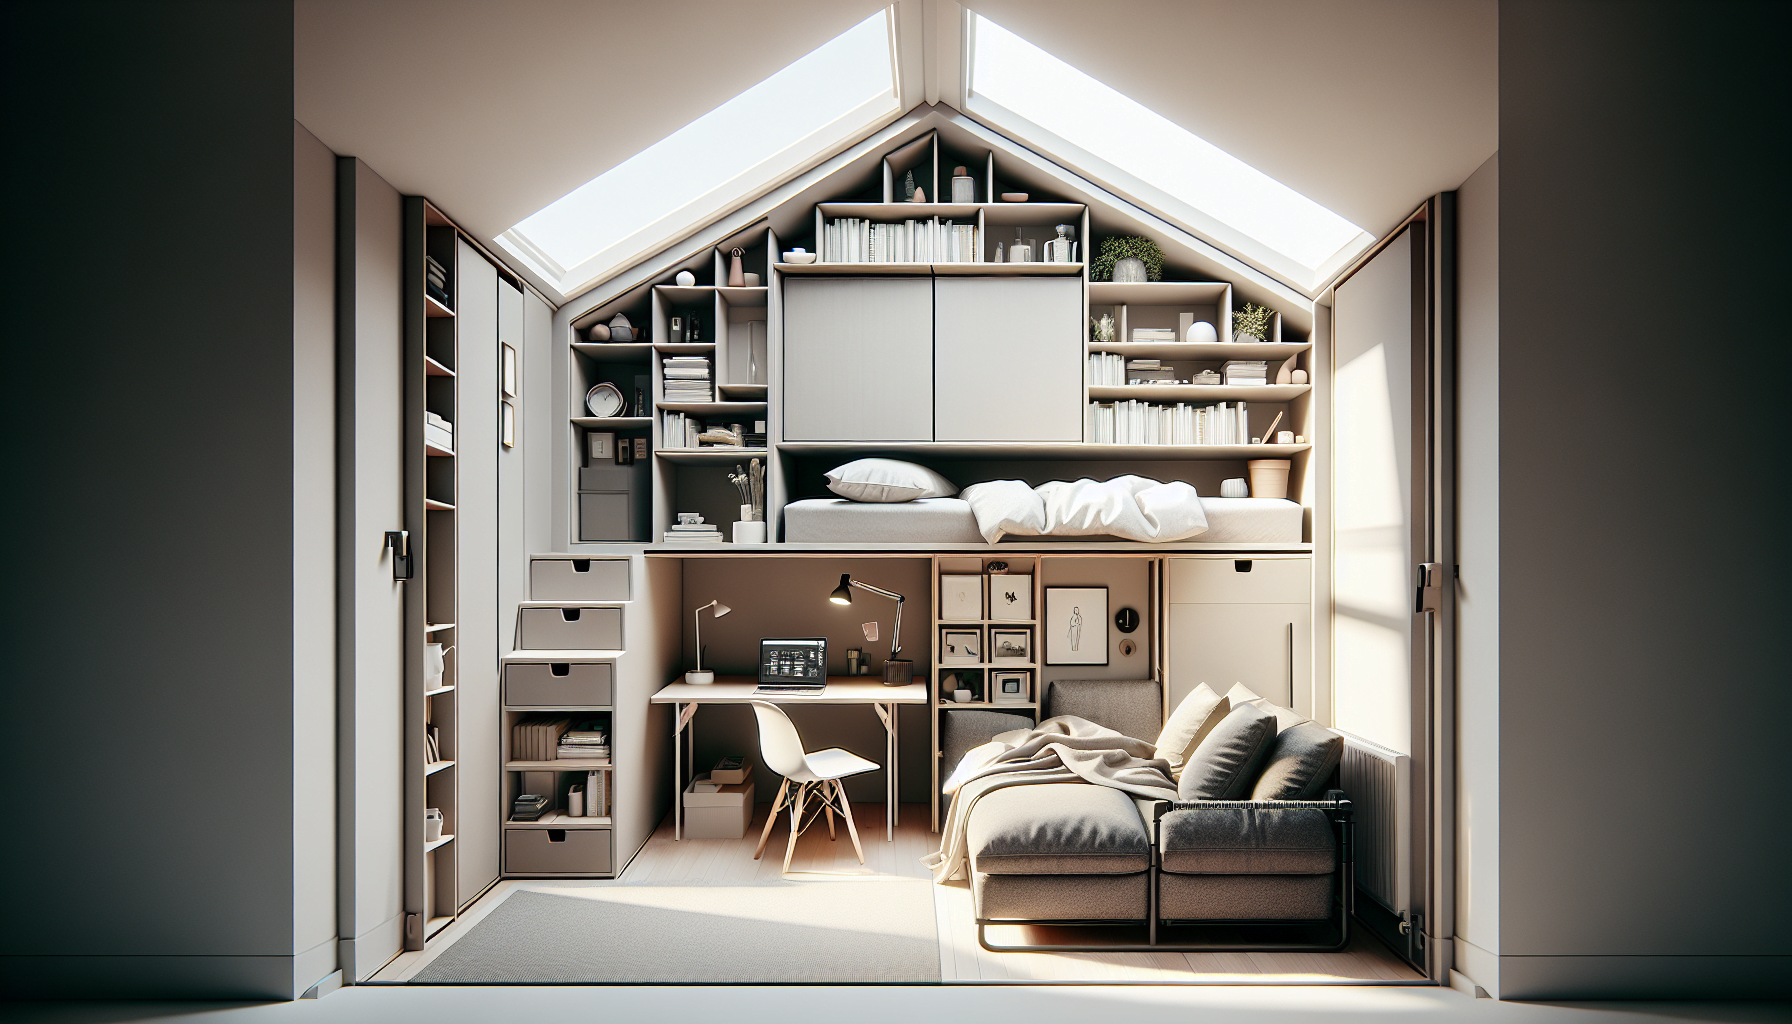 Illustration of creative storage solutions in a loft conversion